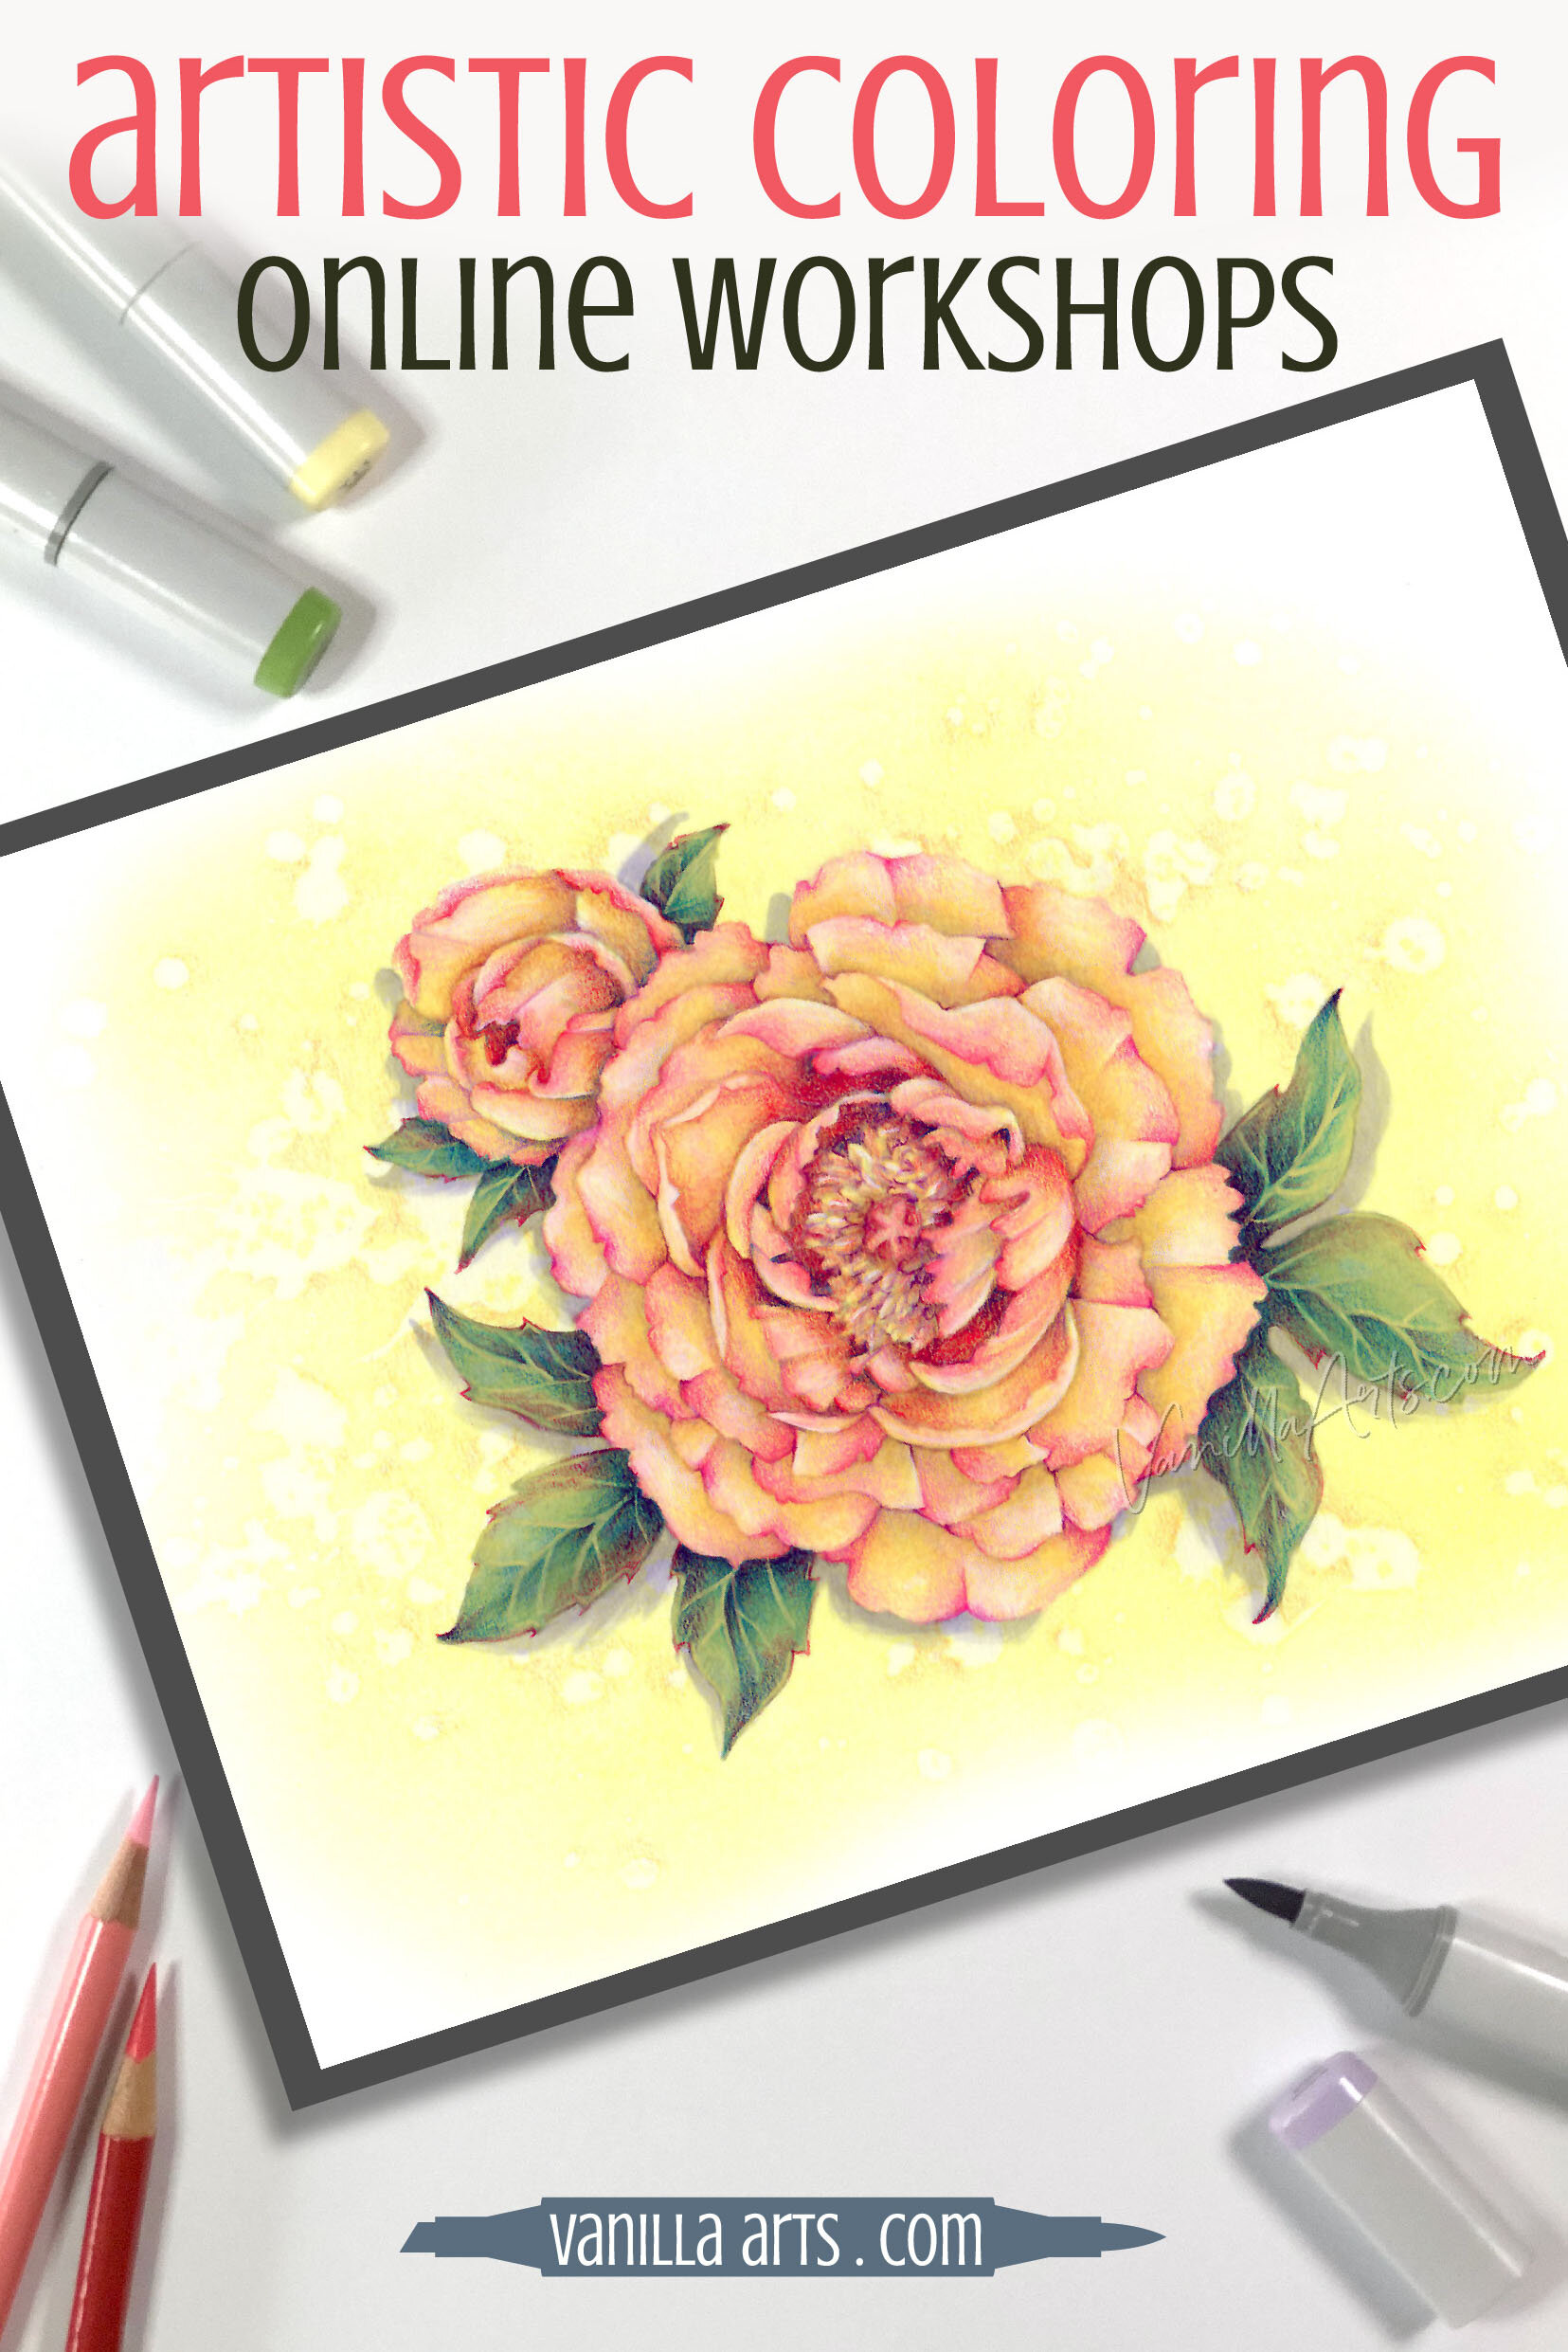 https://images.squarespace-cdn.com/content/v1/54ef7abde4b0b483325a0554/1585585076894-BAOOU1E7W7X6XC58LJQD/Improve+your+Copic+Marker+and+colored+pencil+coloring+by+ditching+the+pretty+projects+and+focusing+on+what+really+matters%E2%80%94+technique%21+Great+coloring+happens+when+you+master+basic+skills.+%7C+VanillaArts.com+%7C+%23copicmarker+%23realisticcoloring+%23howtocolor